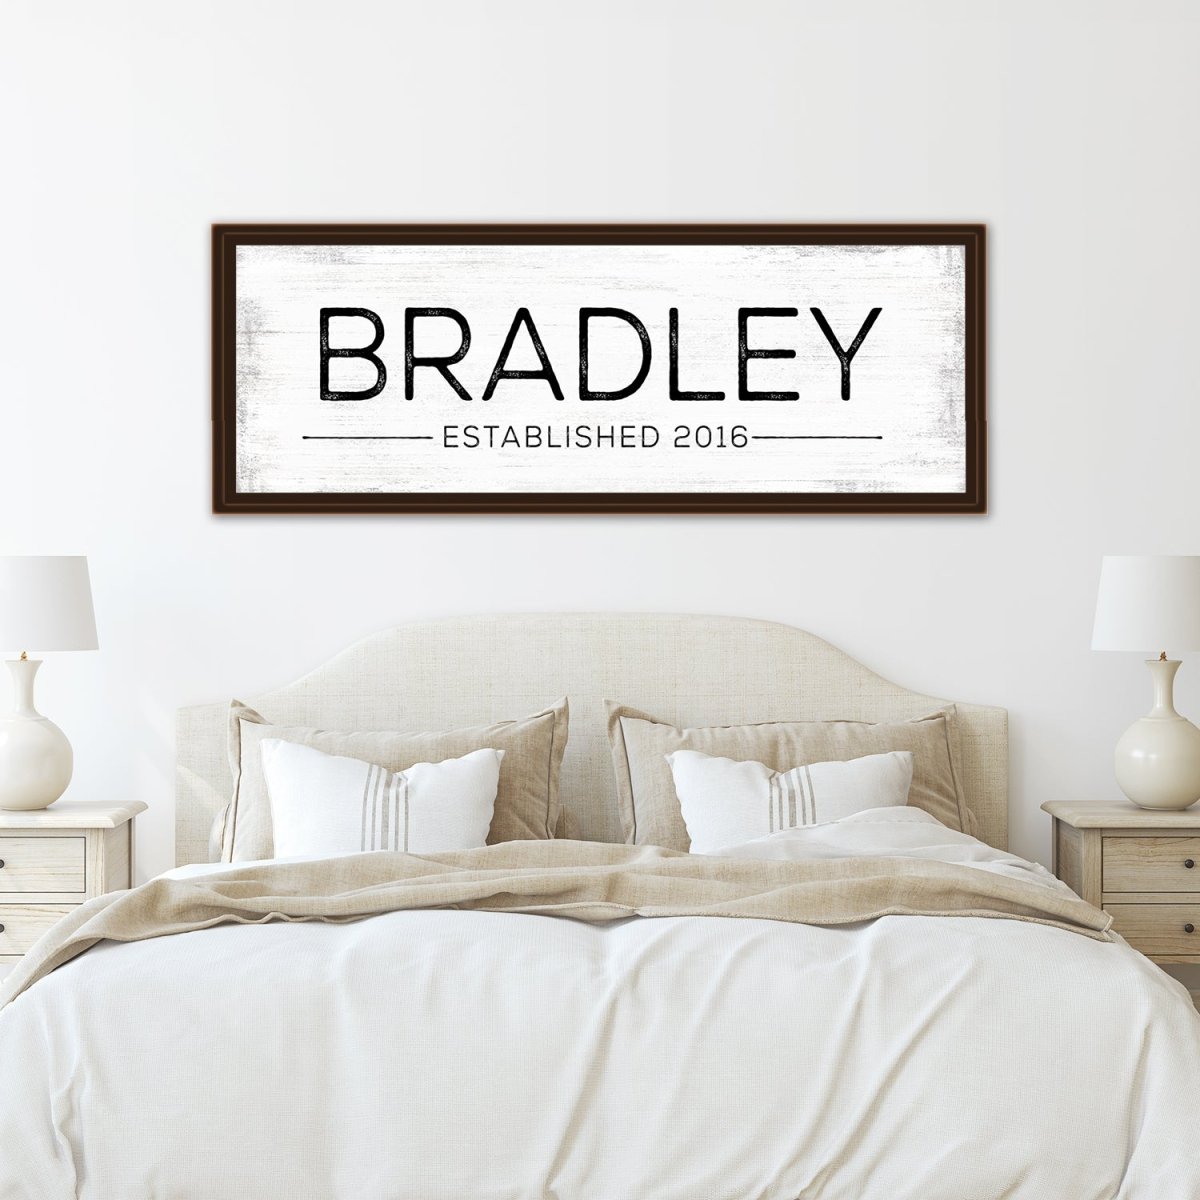 Large Personalized Family Name Signs Above Bed - Pretty Perfect Studio